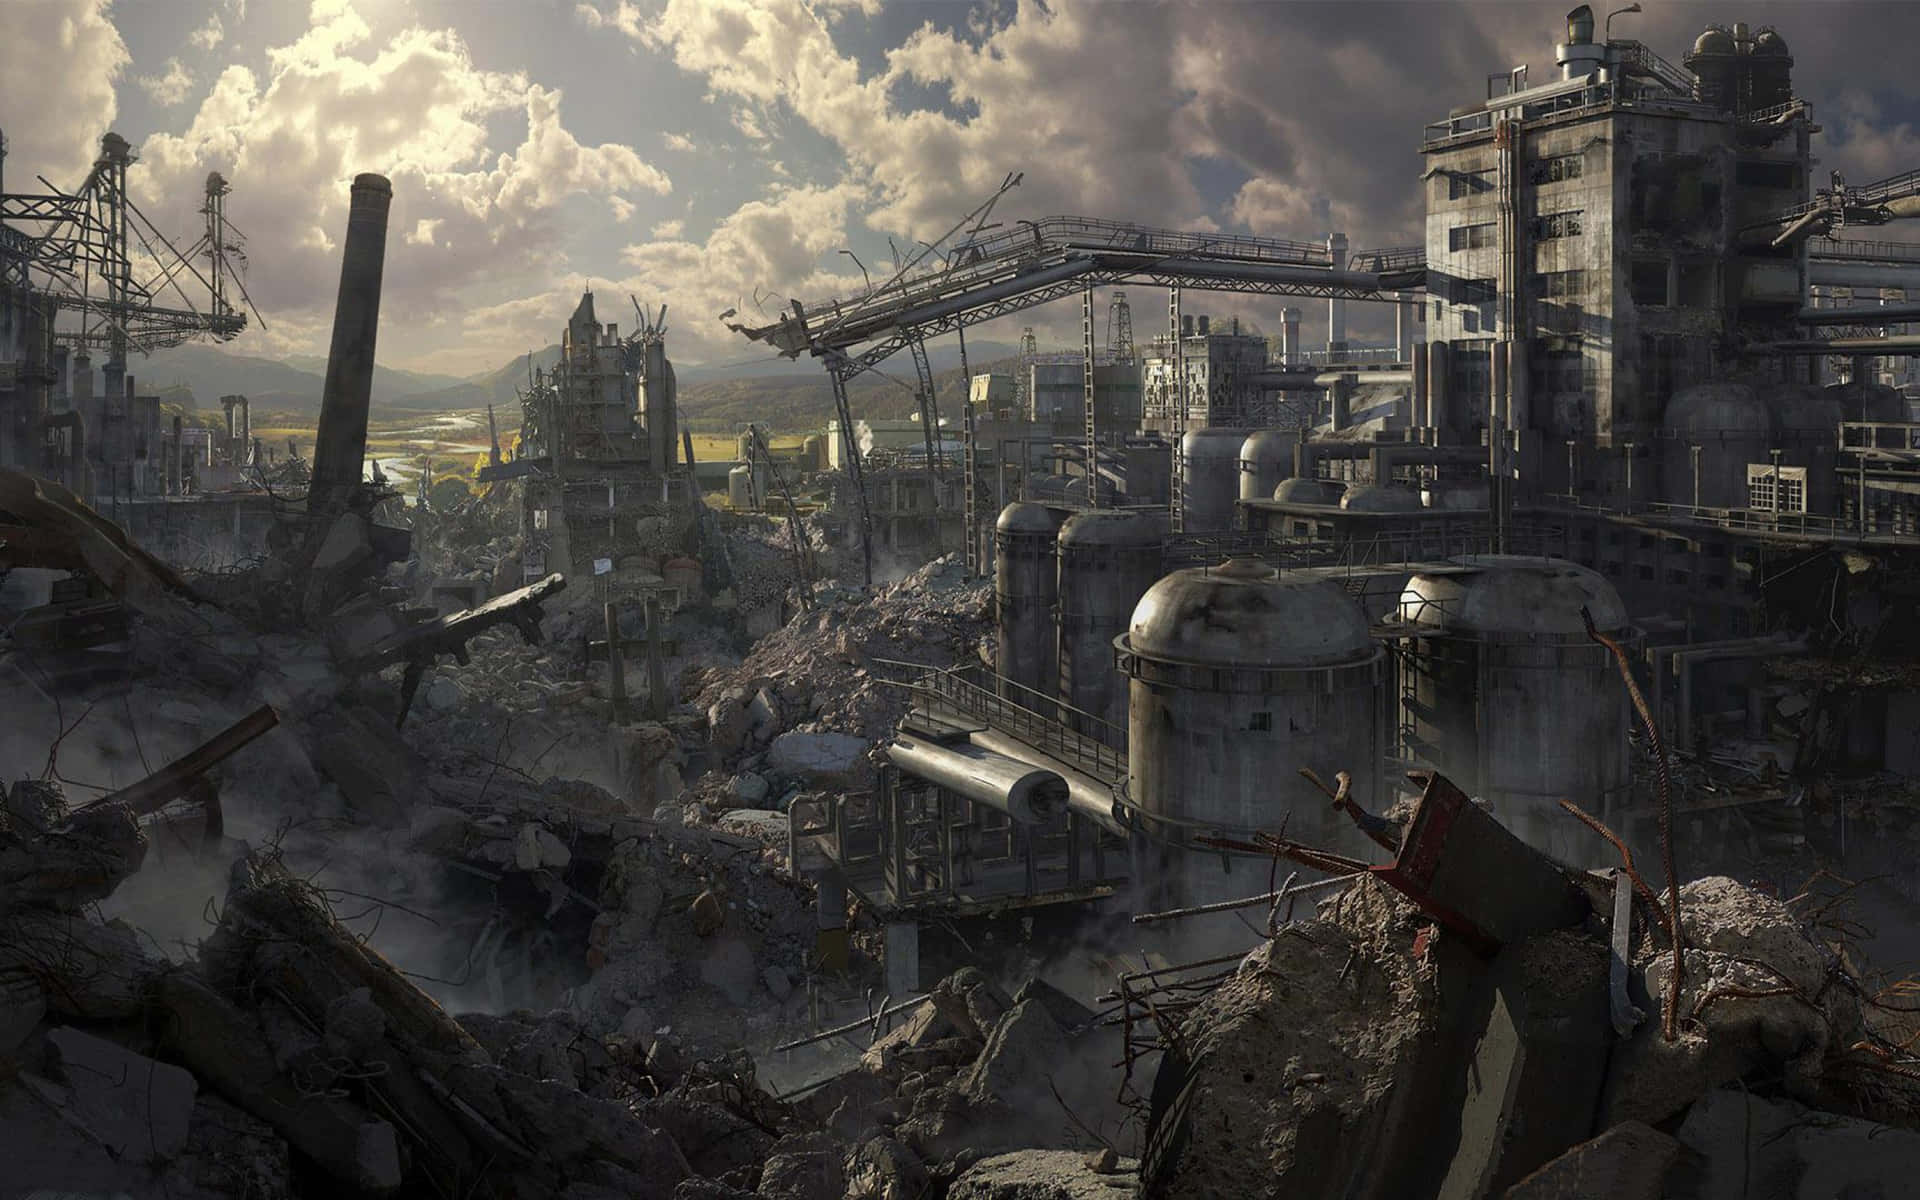 Fallen Factory In Destroyed City Background